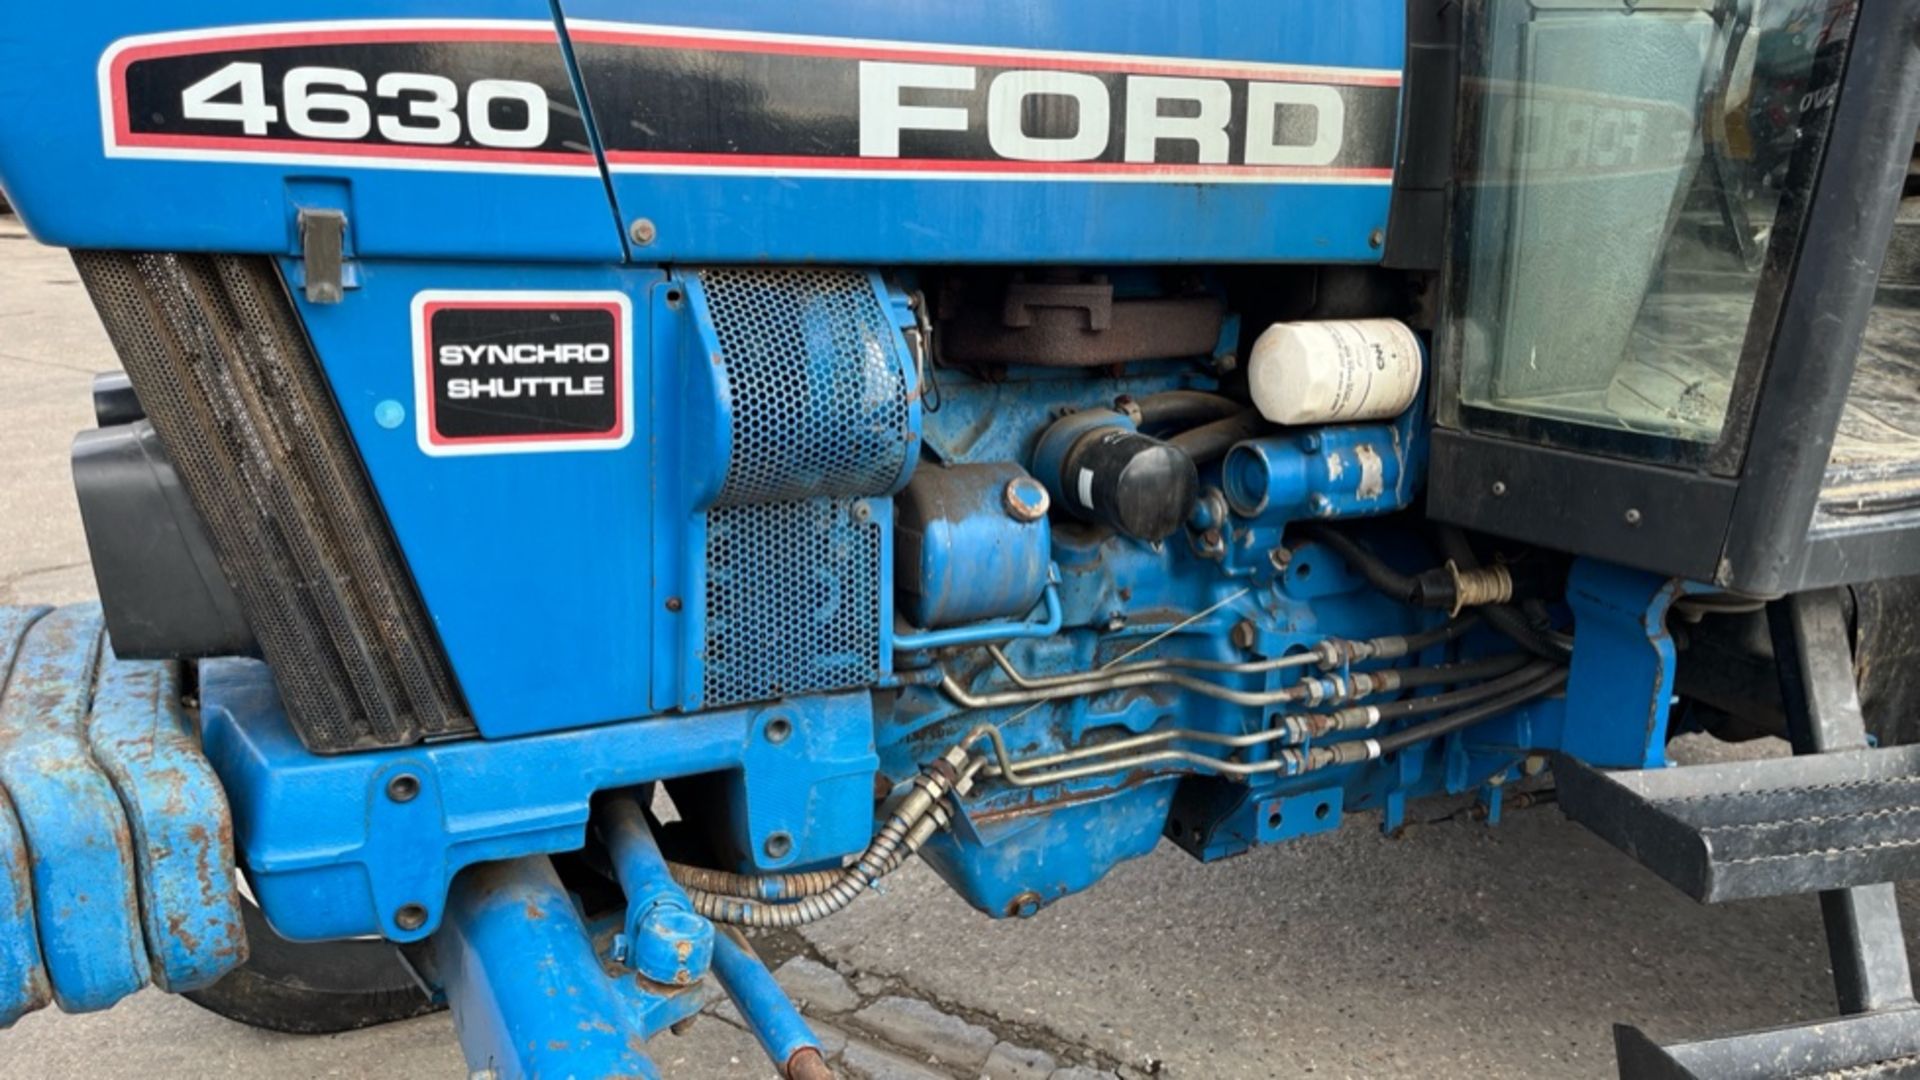 FORD 4630 SYNCHRO SHUTTLE Tractor 2wd Diesel (YEAR 2017) - Image 15 of 22